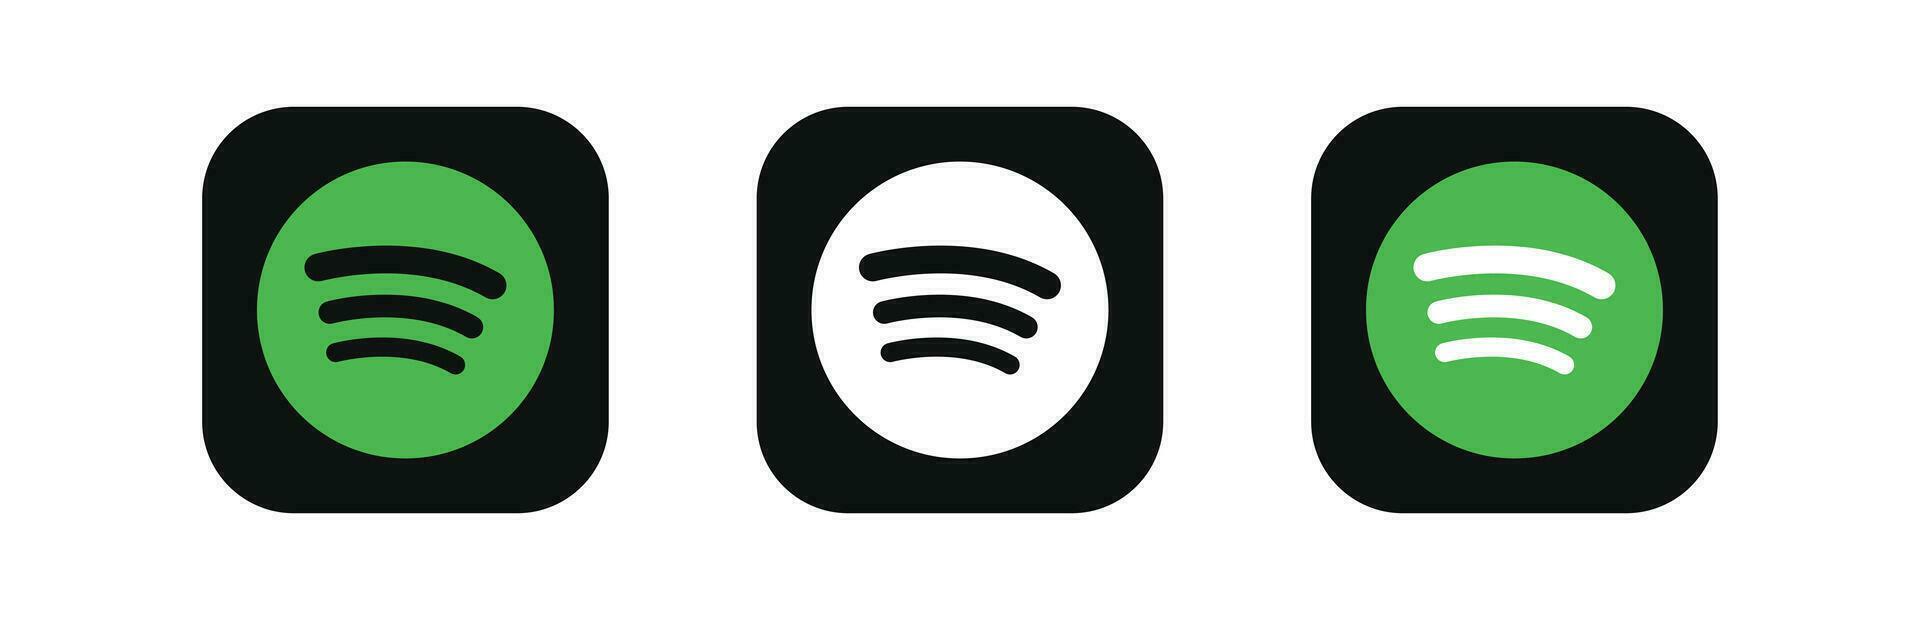 Spotify icon. Spotify Social media logo. Set of Spotify icon Collection. vector